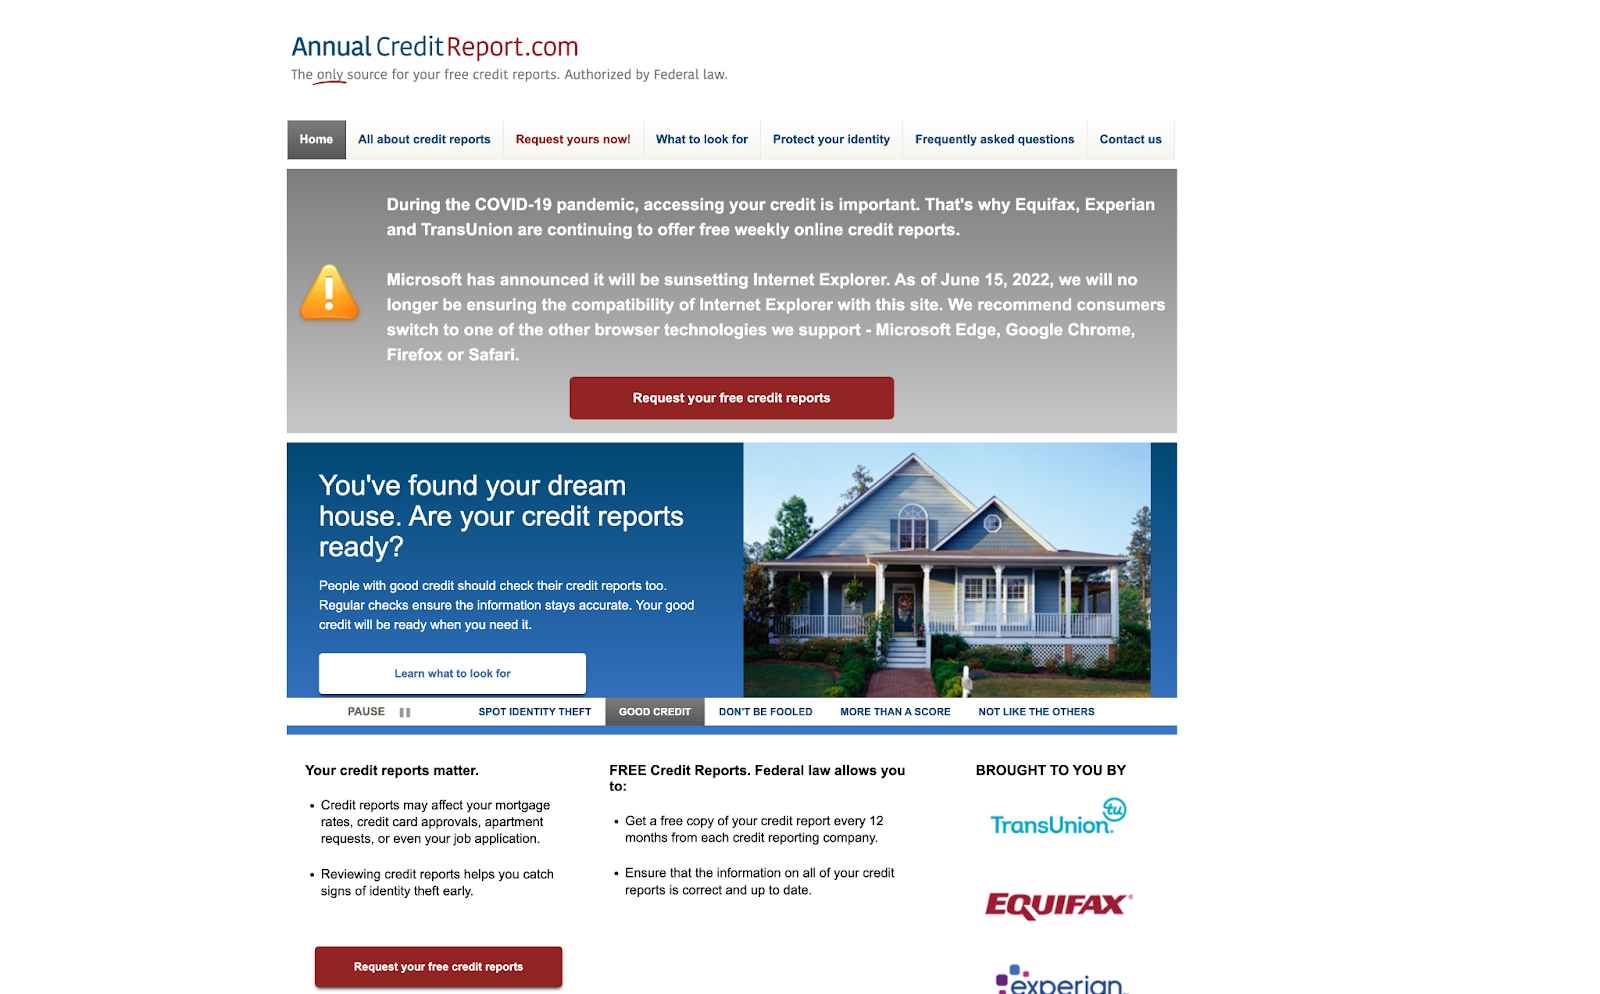 how to get a high credit score